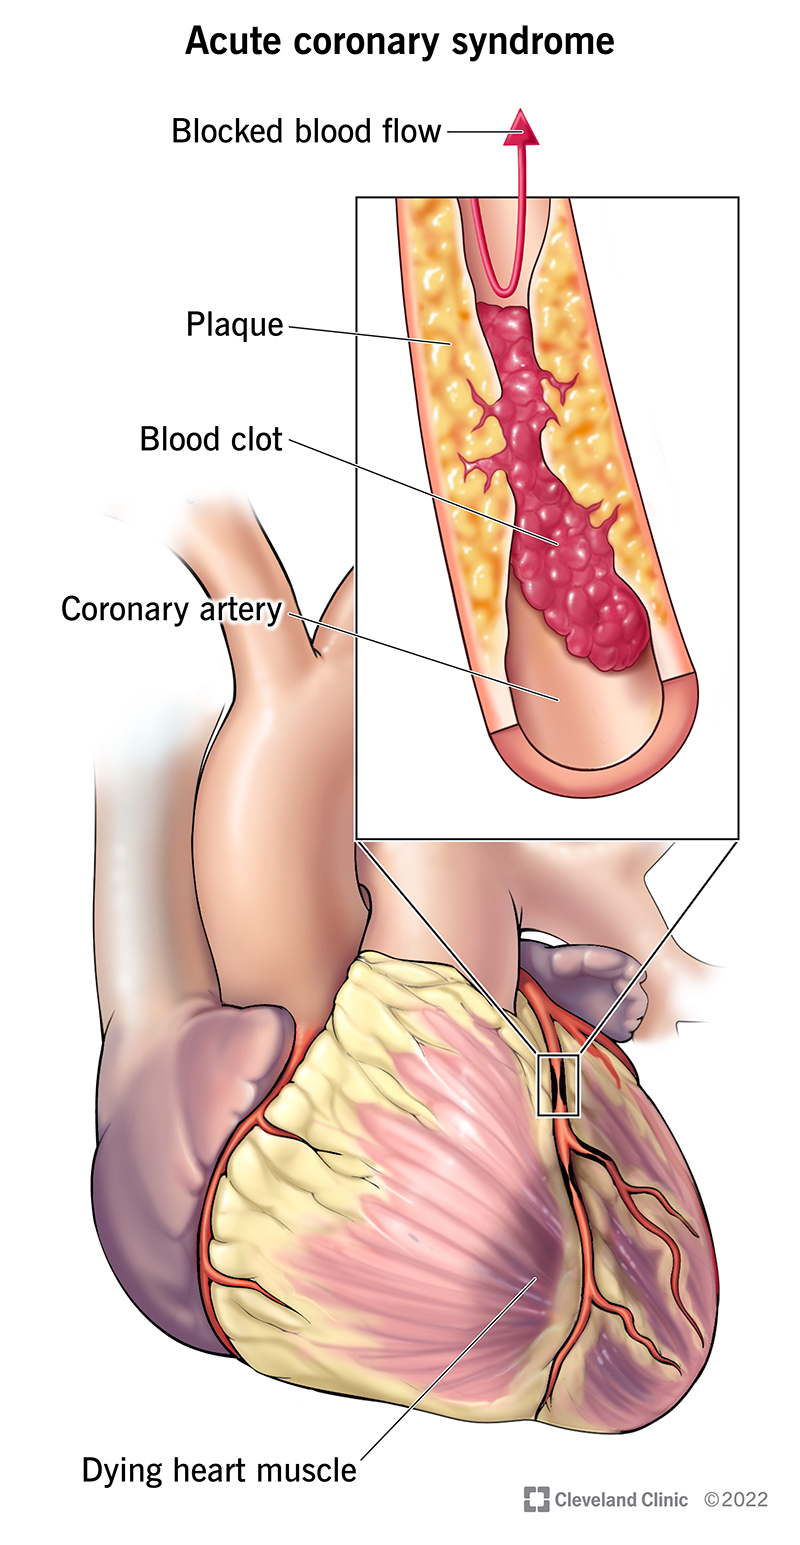 In coronary artery syndrome, plaque narrows the coronary artery and a blood clot forms, preventing oxygen from getting to the heart muscle, which begins to die.